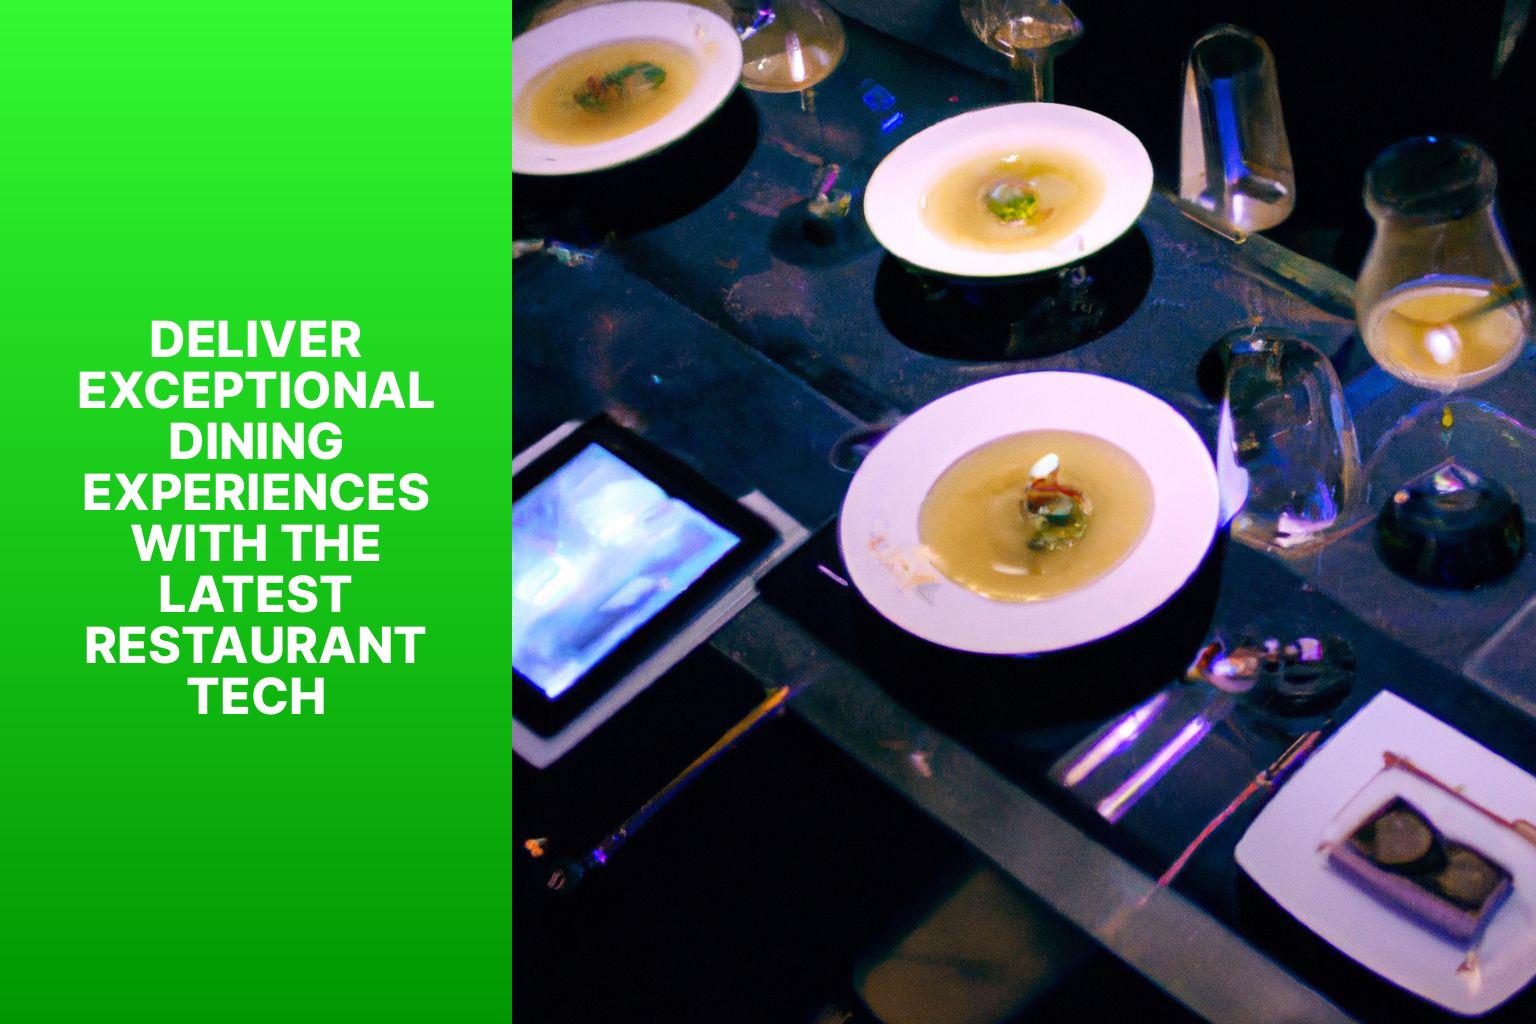 Deliver Exceptional Dining Experiences with the Latest Restaurant Tech